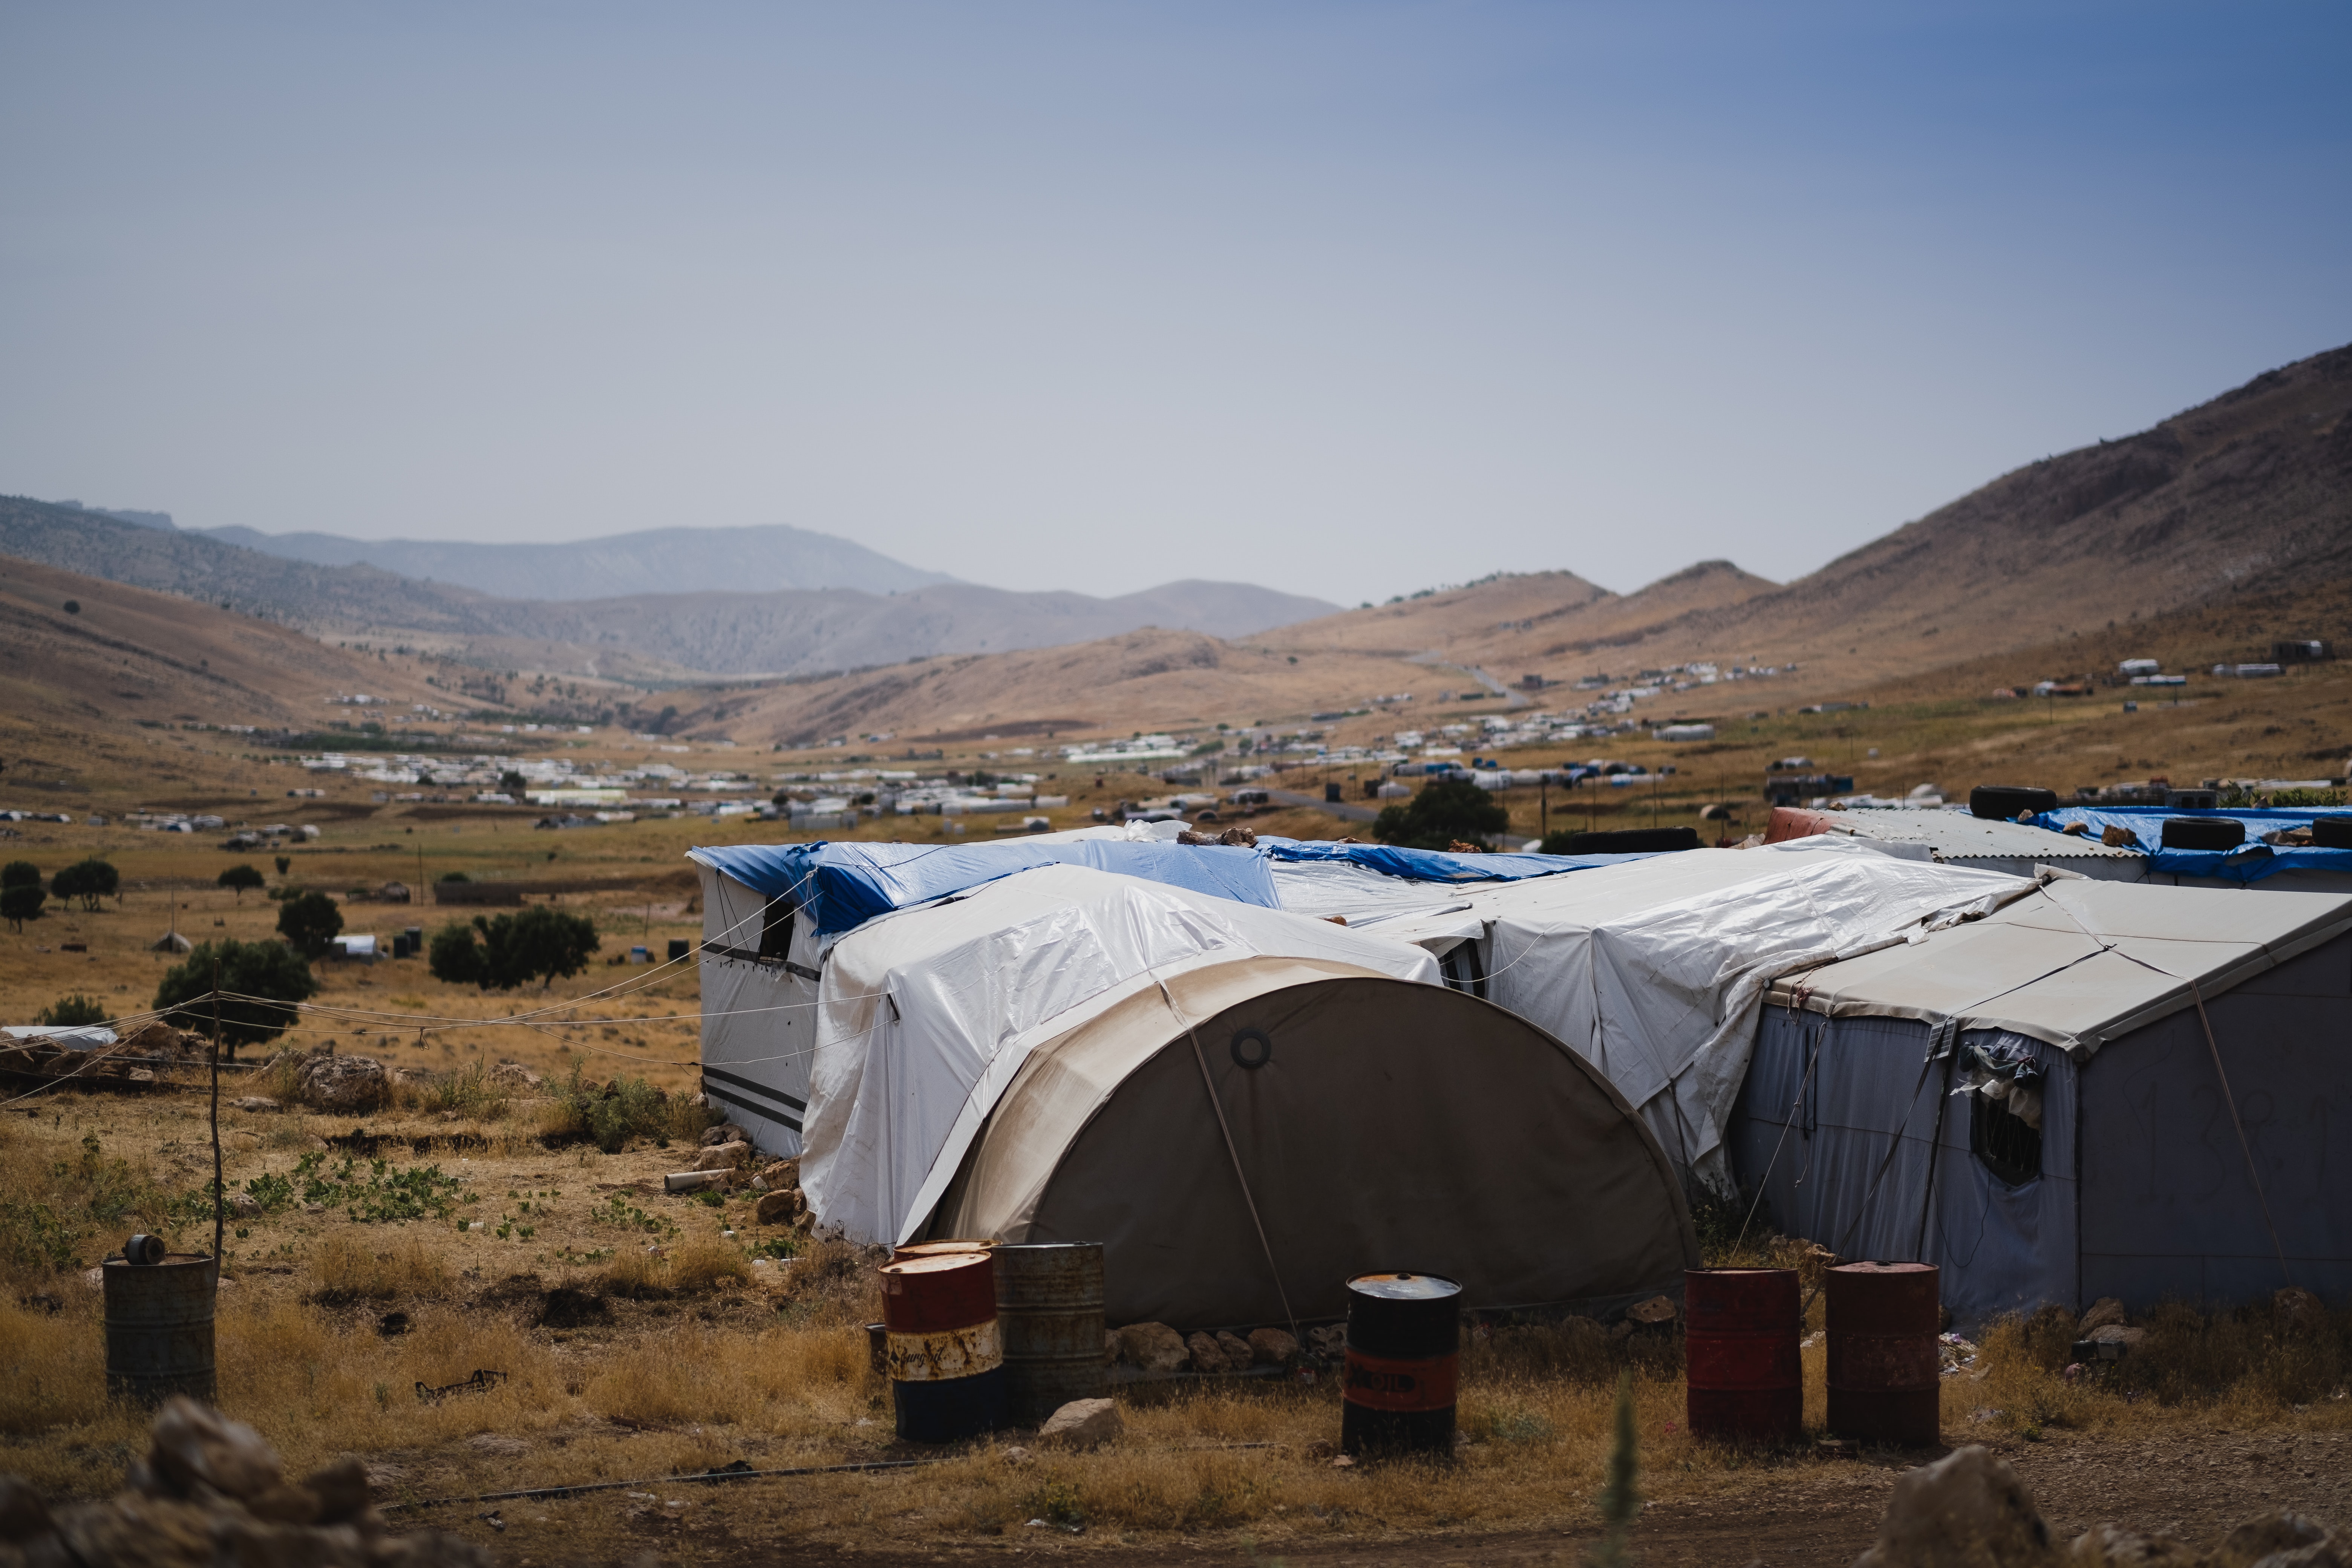 The Sardashti Camp, a displaced persons camp located in Shingal, Iraq (also known as Sinjar). Photo by Levi Meir Clancy on Unsplash